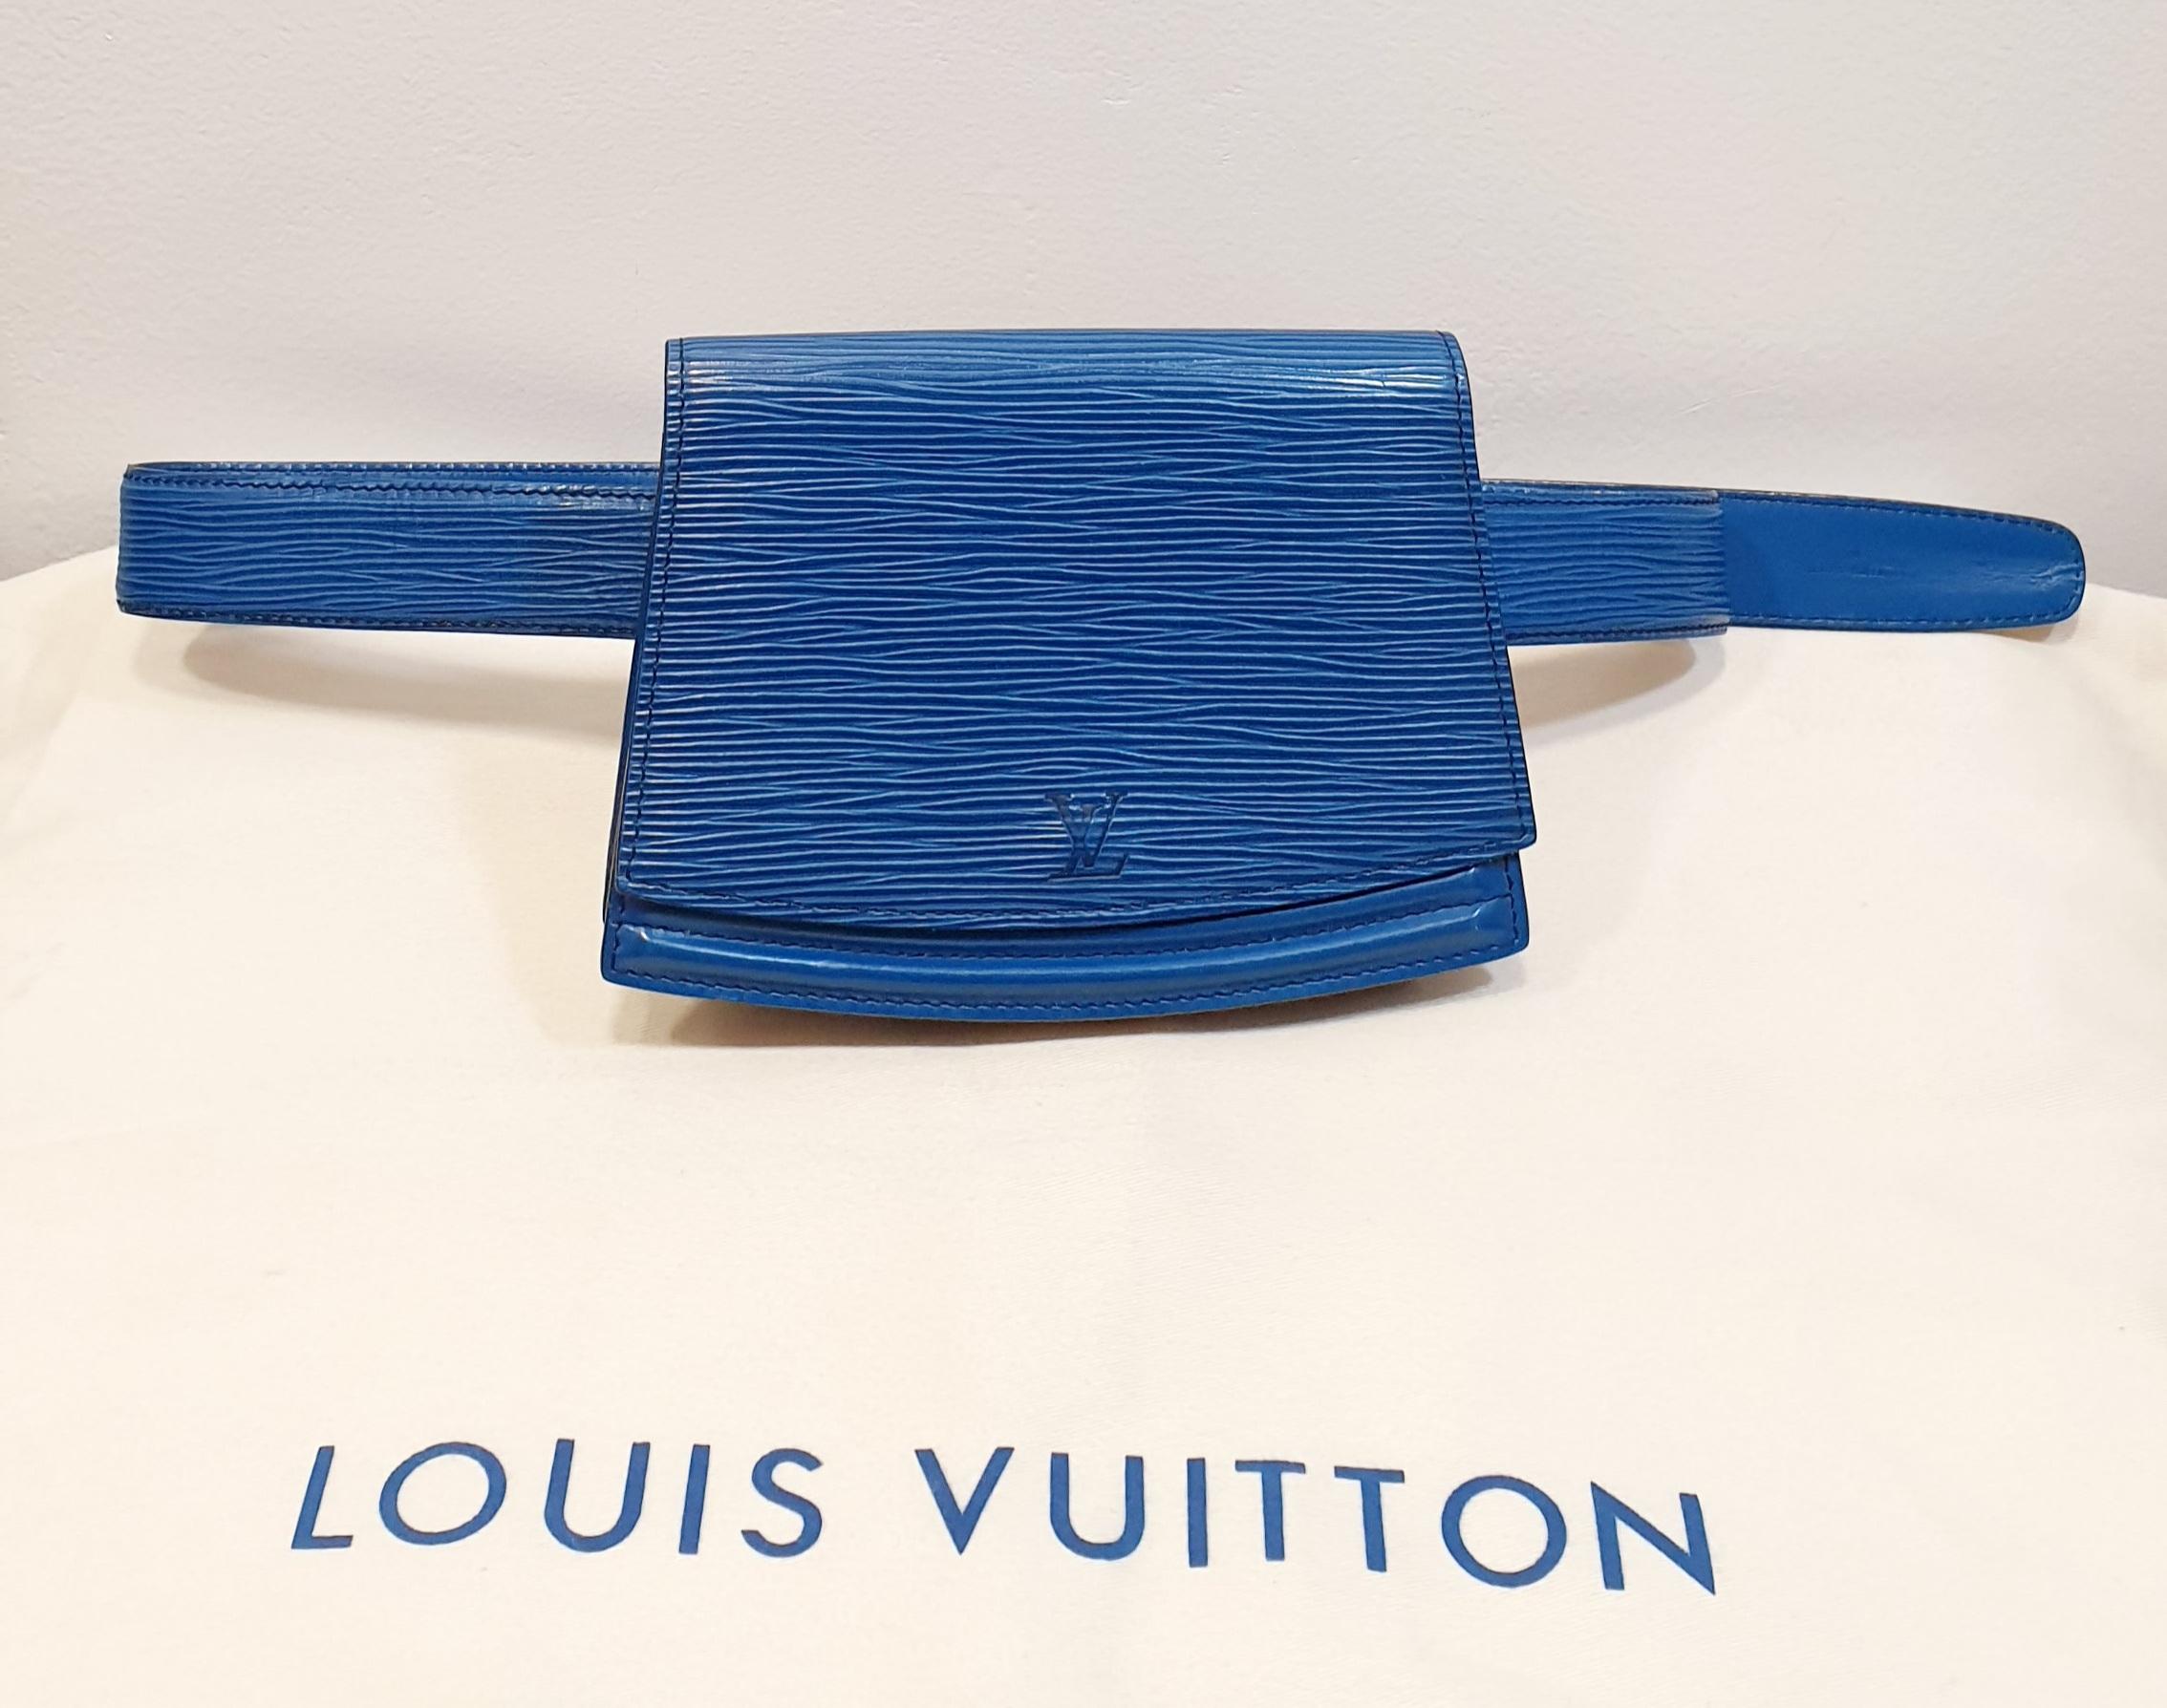 Louis Vuitton belt bag in Tilsitt blue Epi leather
The belt metal area has faded the golden lacquer 
Rare and hard to find, this crescent-shaped fanny pack comes with a removable belt that can also be worn separately.
This mini bag is the perfect